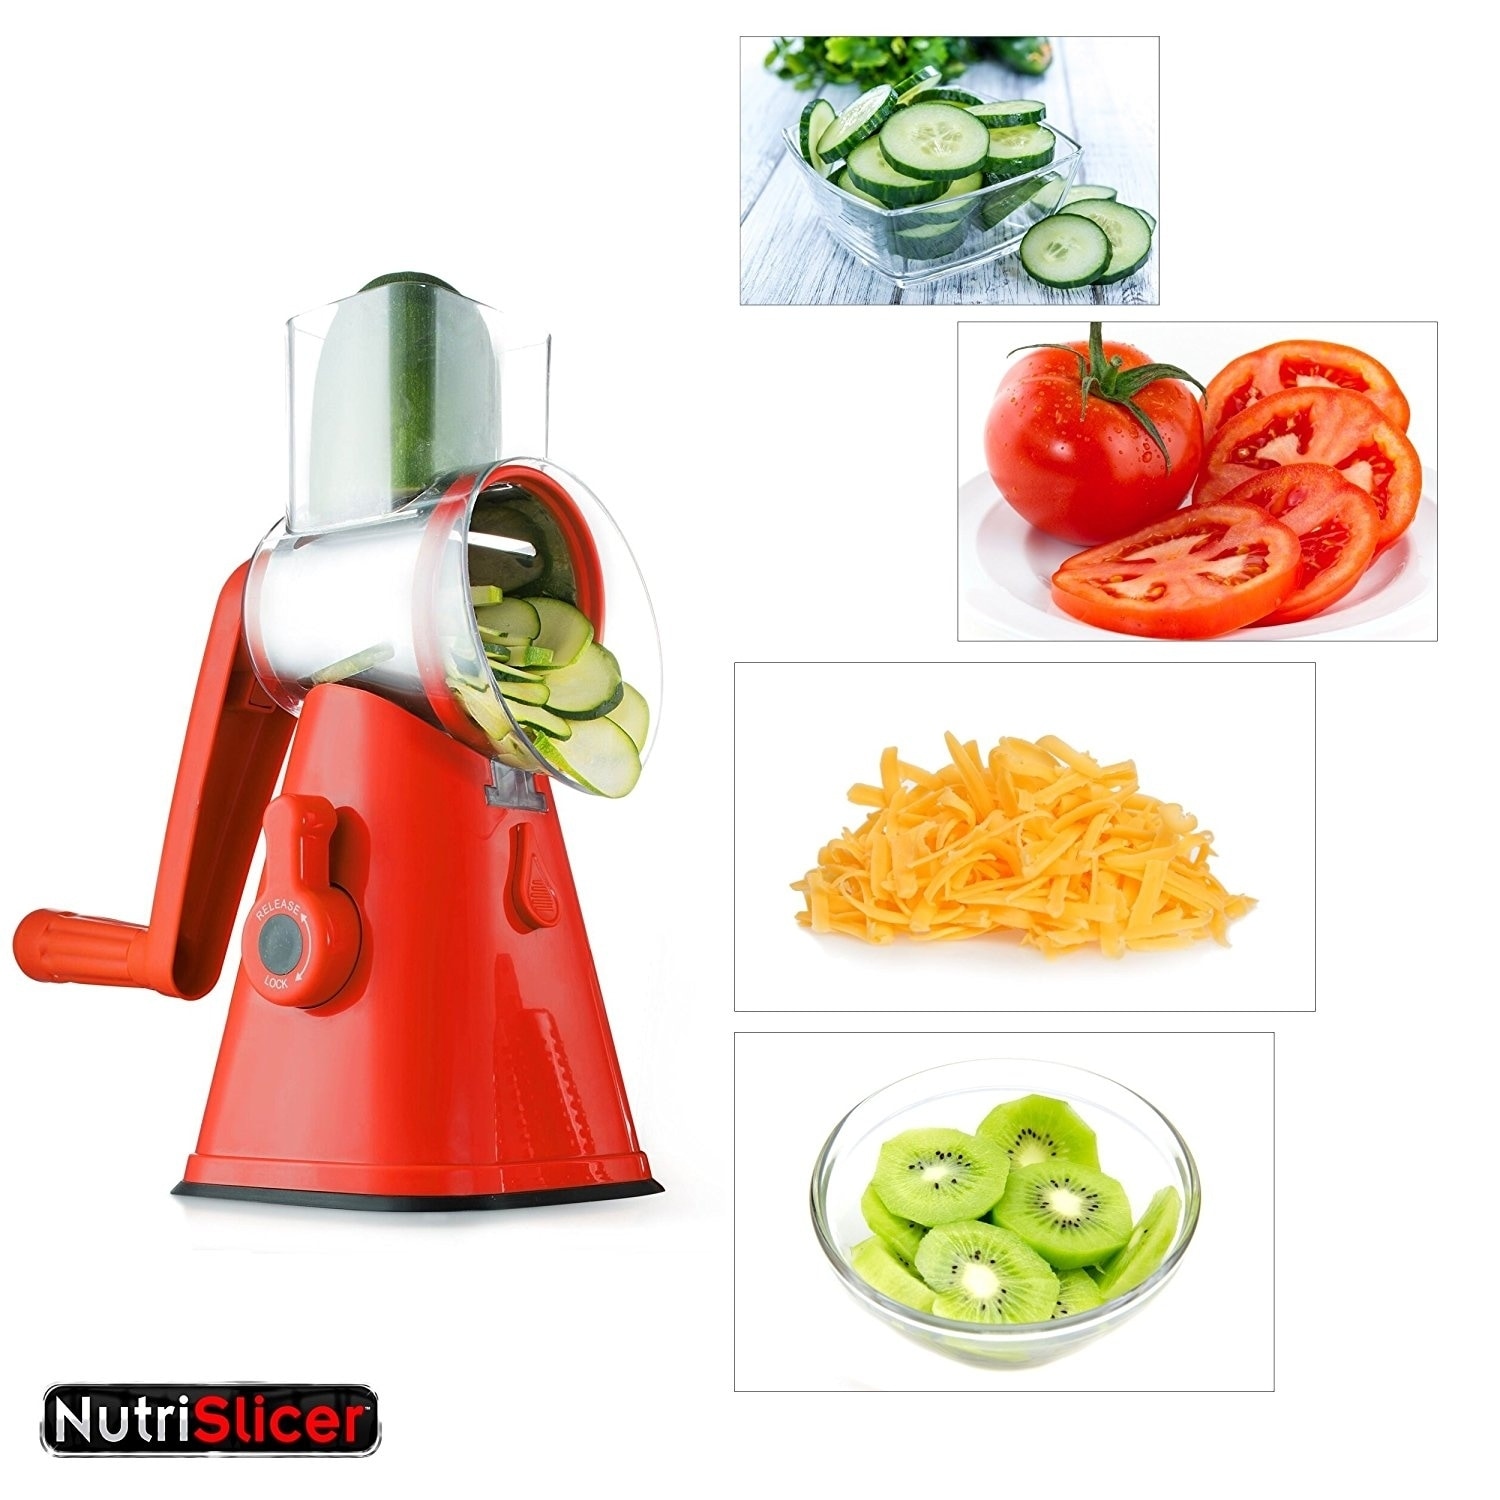 https://ak1.ostkcdn.com/images/products/21453514/Nutri-Slicer-As-Seen-On-TV-Vegetable-and-Fruit-Slicer-18x-Faster-93a36087-ee67-4b3e-961f-35acbe755f48.jpg